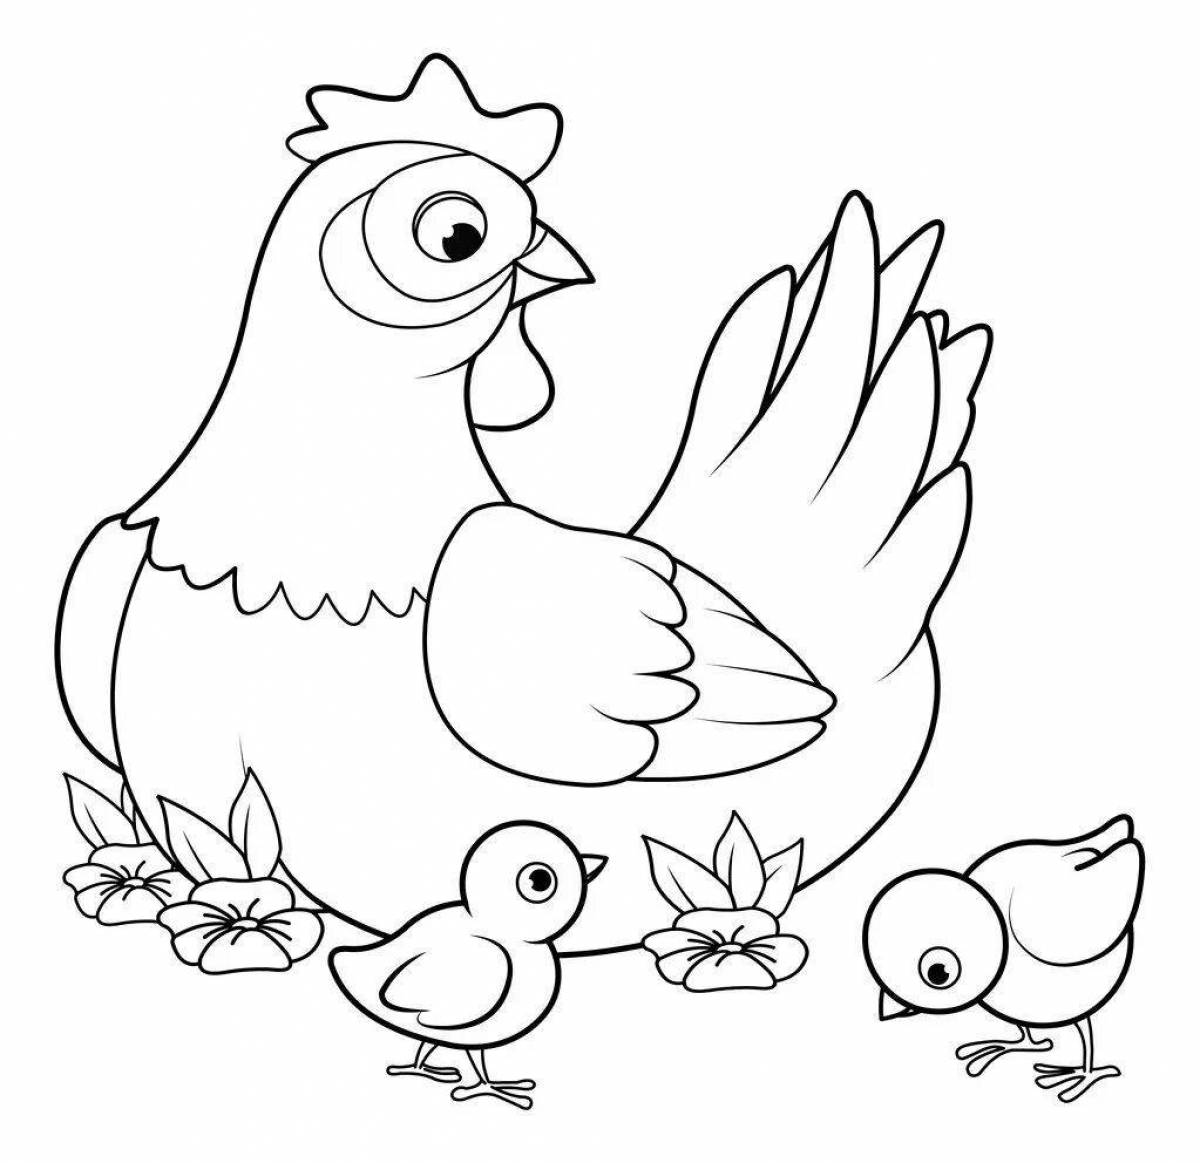 Adorable chicken coloring pages for kids